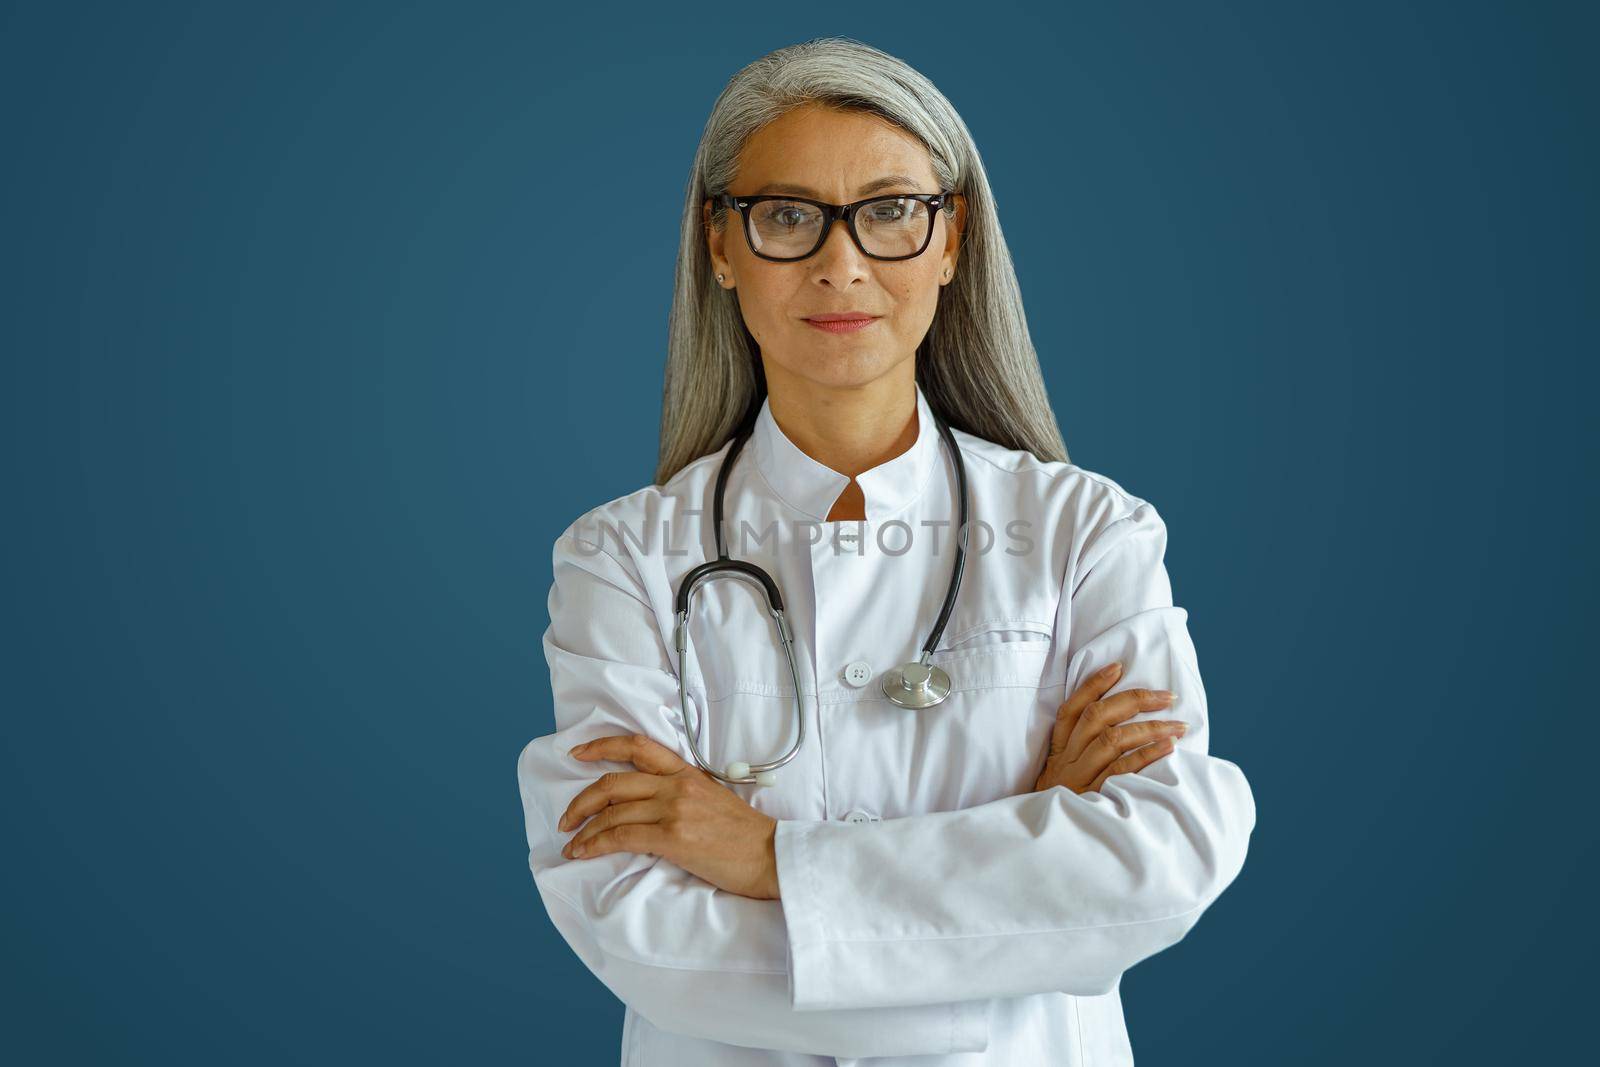 Mature female doctor in white robe with glasses and stethoscope stands on blue background in studio. Professional medical staff